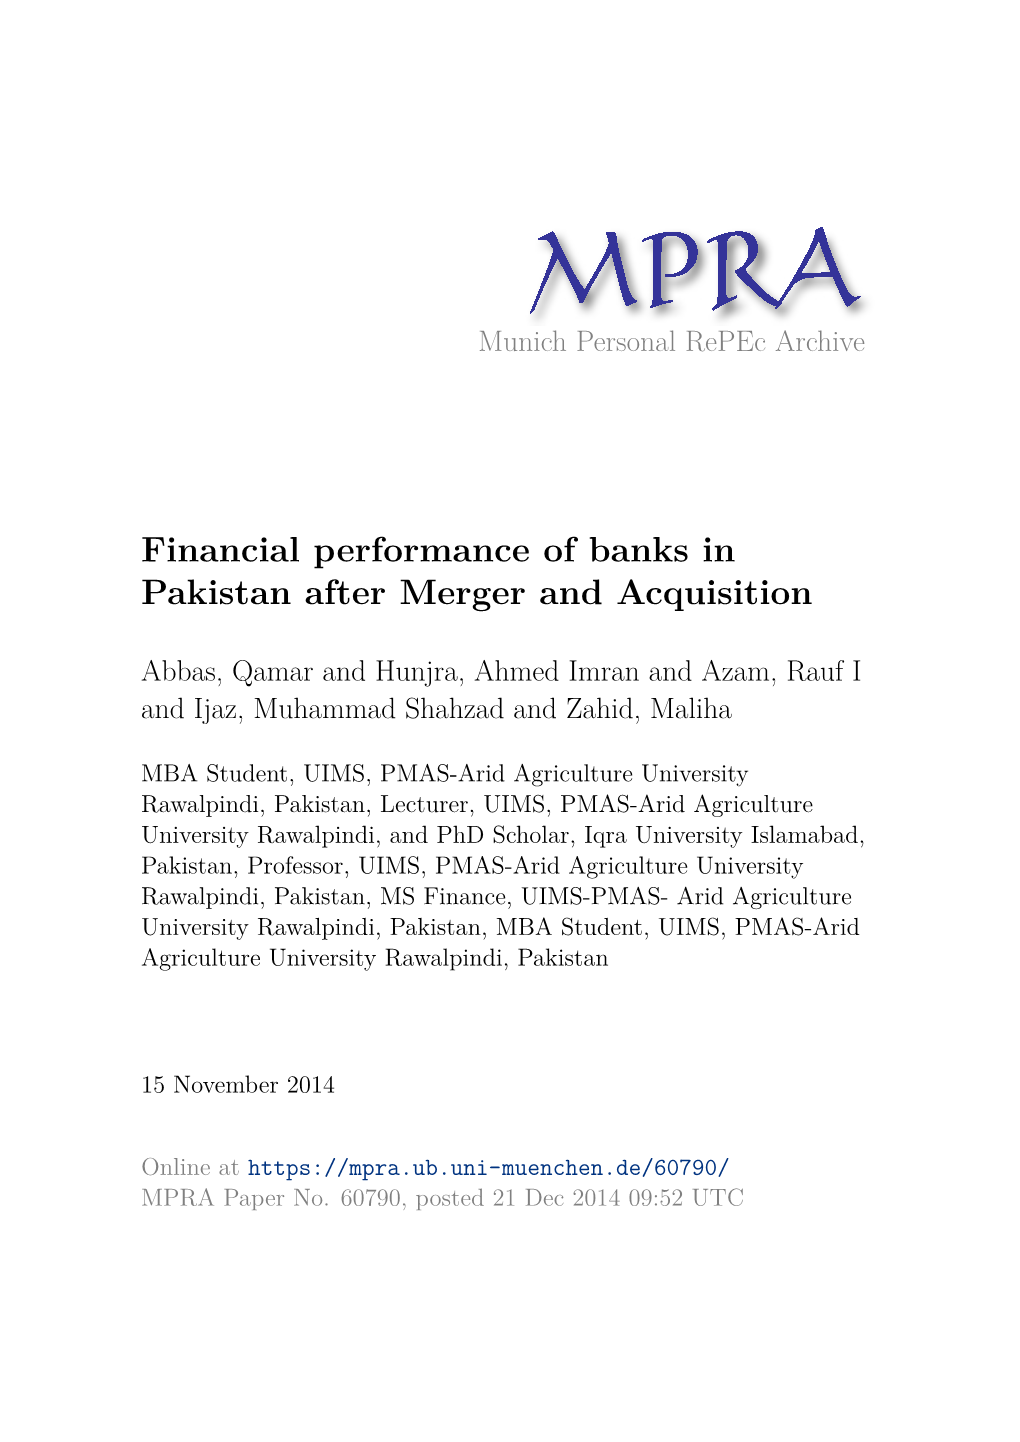 Financial Performance of Banks in Pakistan After Merger and Acquisition